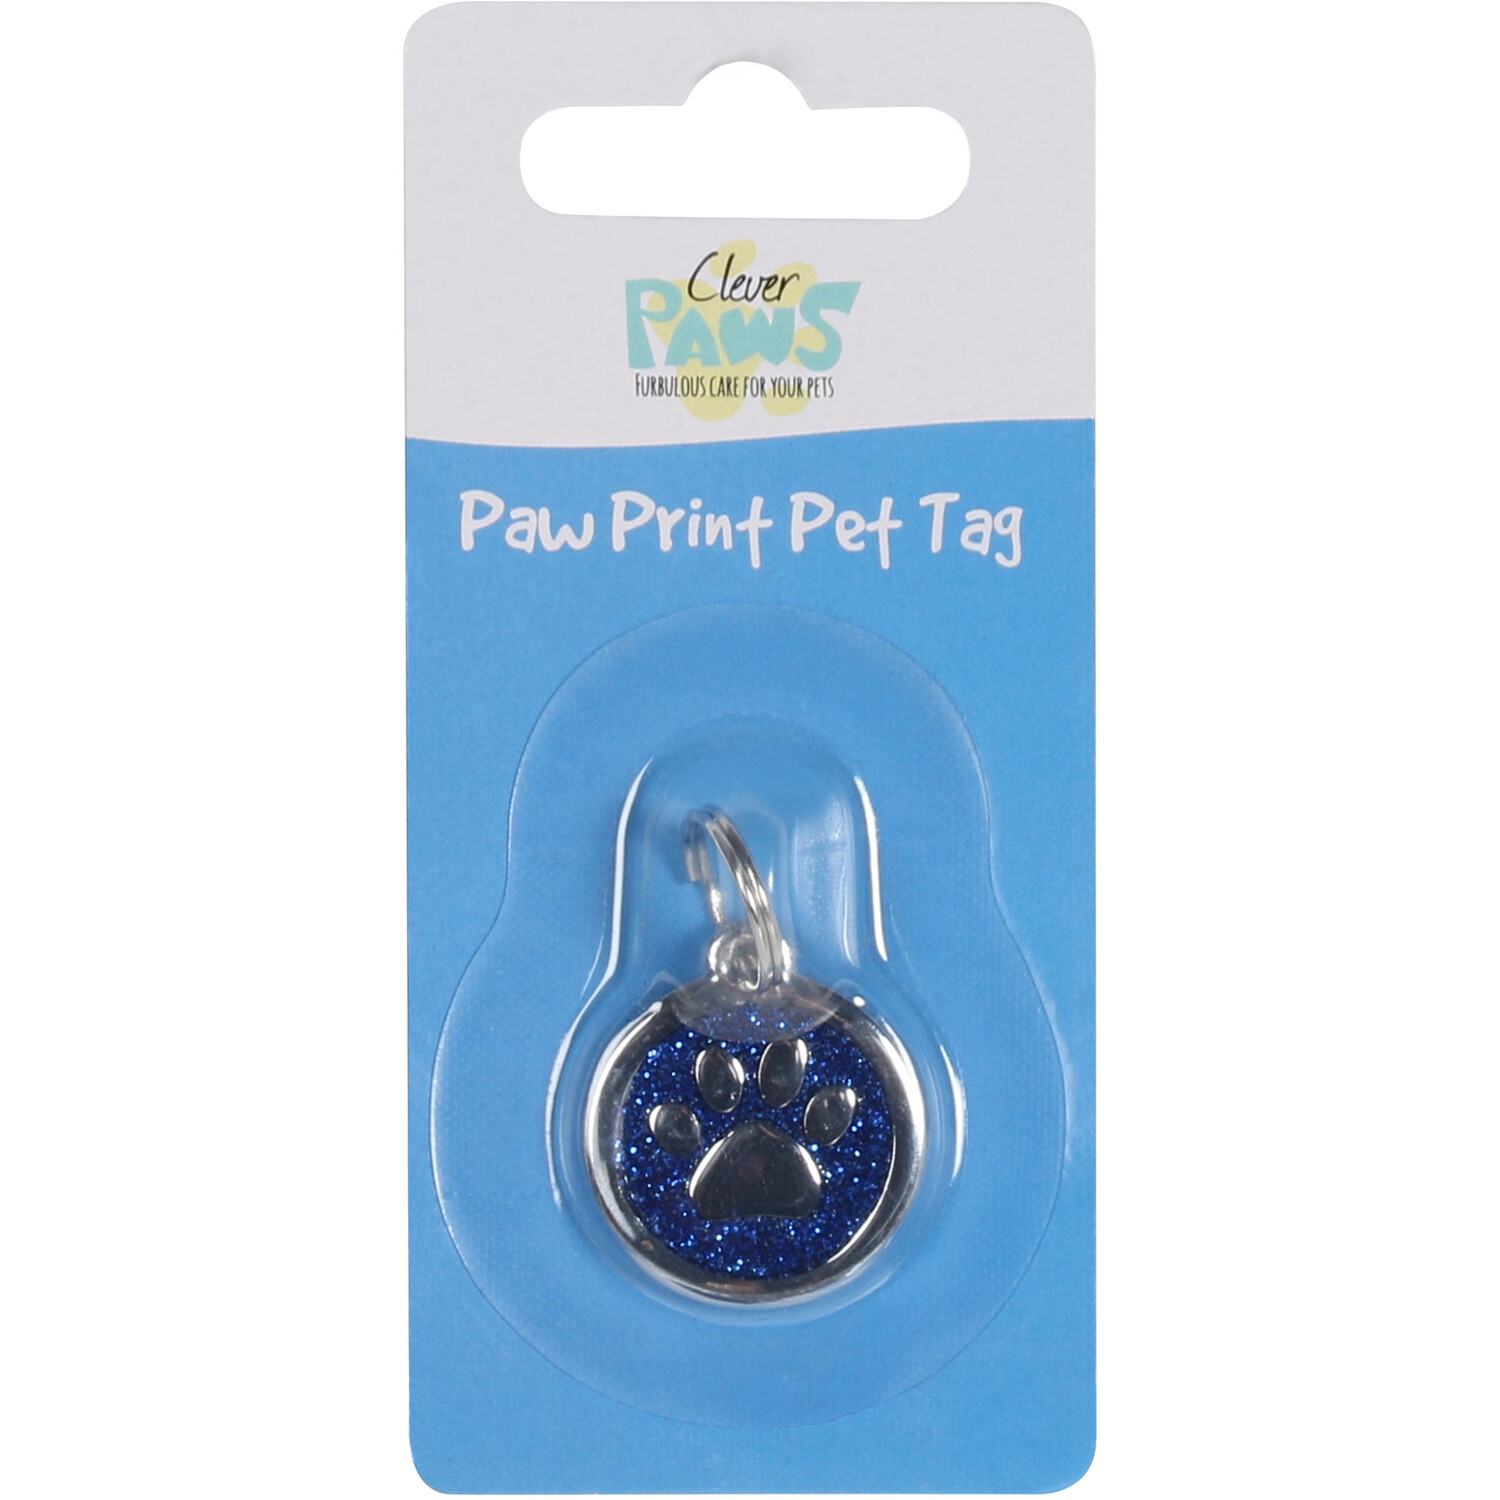 Clever Paws Pet Tag Image 6